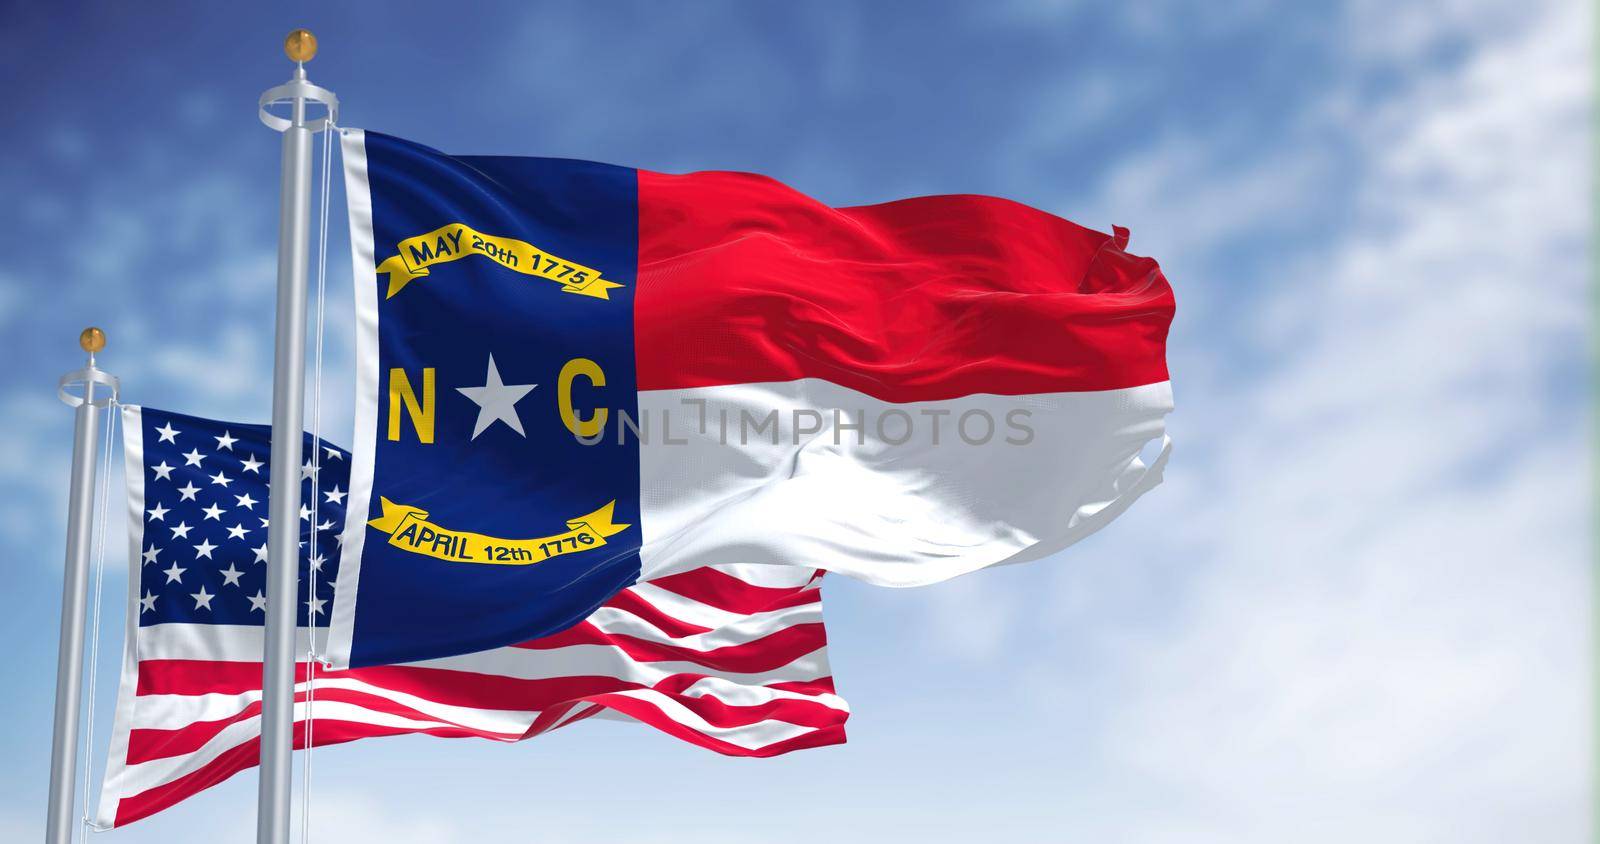 The North Carolina state flag waving along with the national flag of the United States of America. In the background there is a clear sky. North Carolina is a state in the Southeastern region of the United States